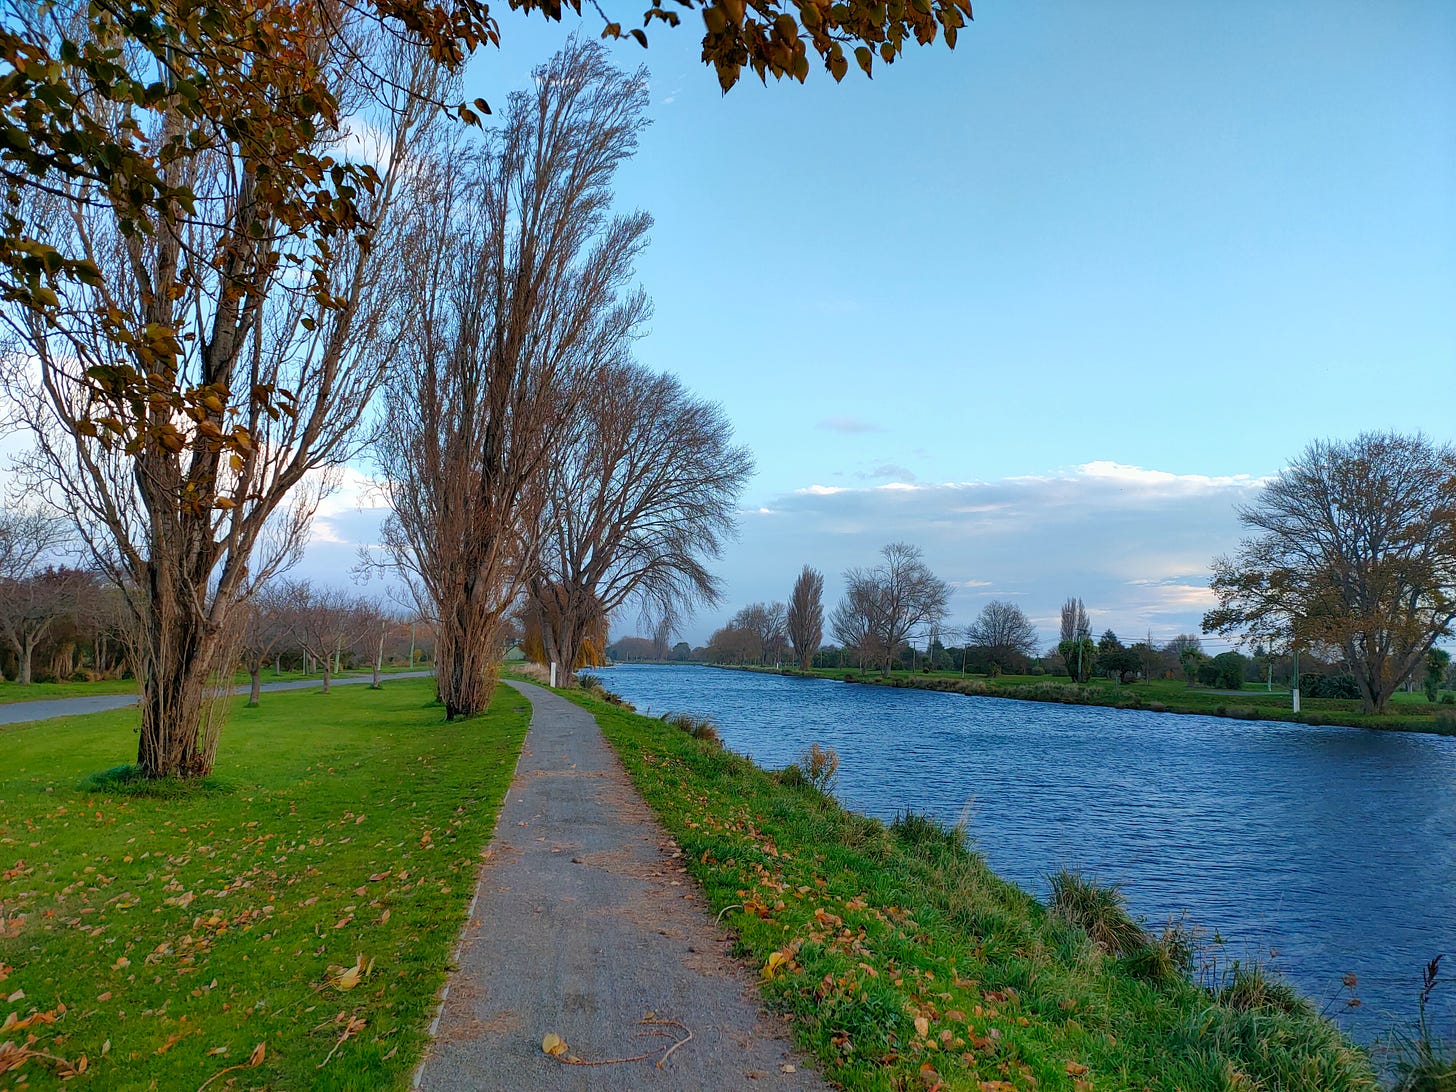 A path, a river, and green grass run parallel towards the distance. There are a few tall trees in the middle and far distance, all losing their leaves or bare. The sky is pale blue, and clouds are massing on the horizon.